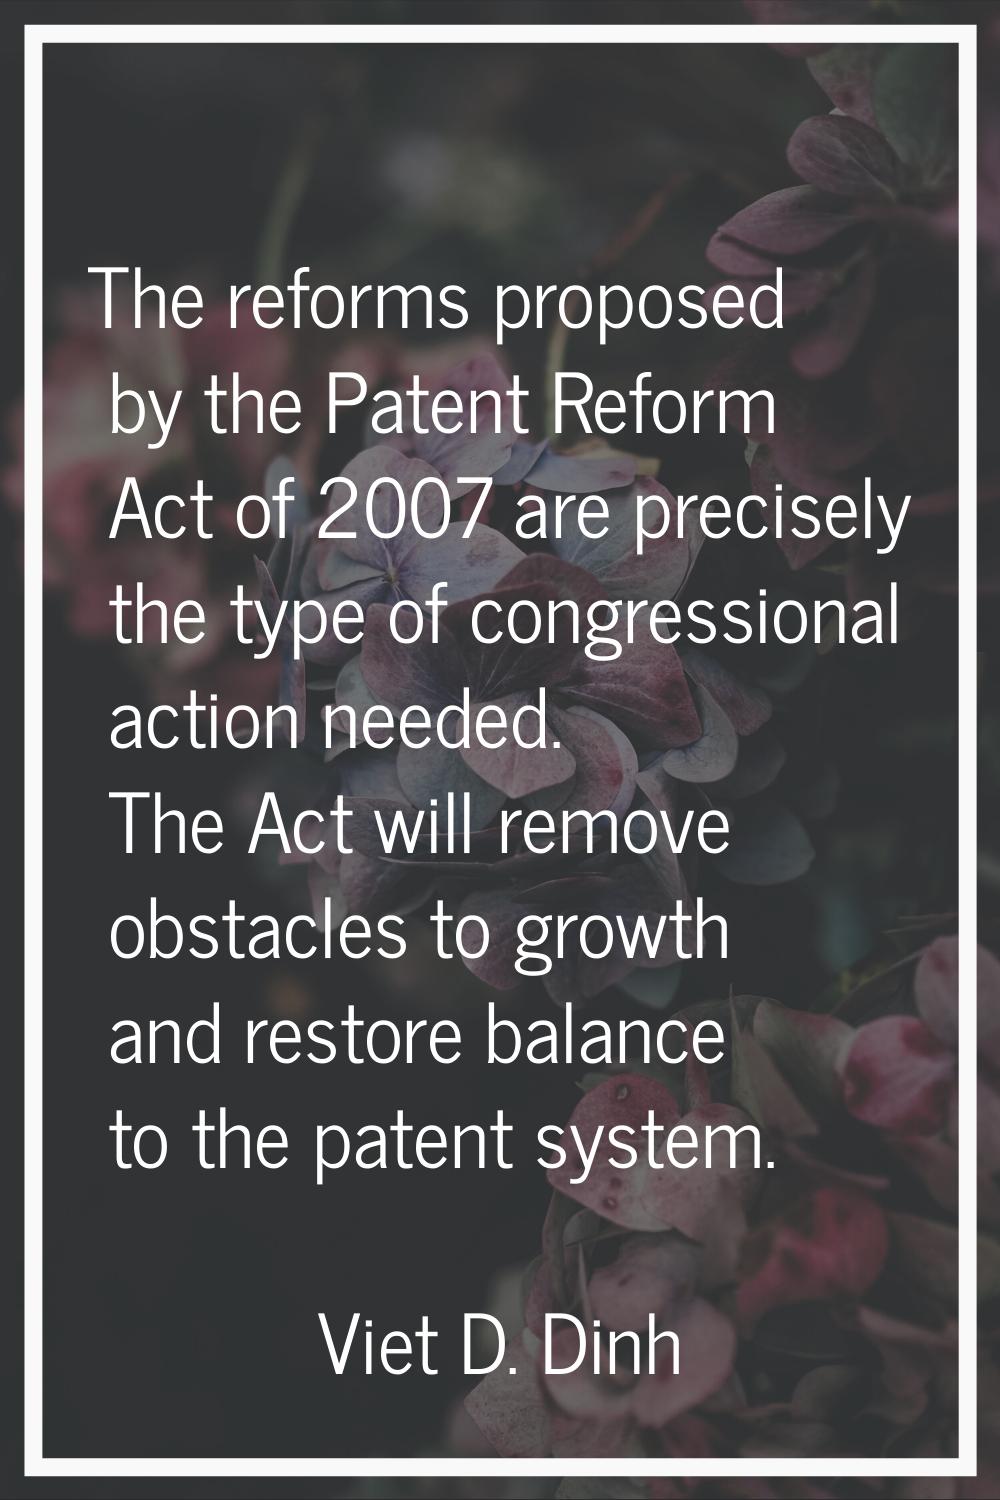 The reforms proposed by the Patent Reform Act of 2007 are precisely the type of congressional actio